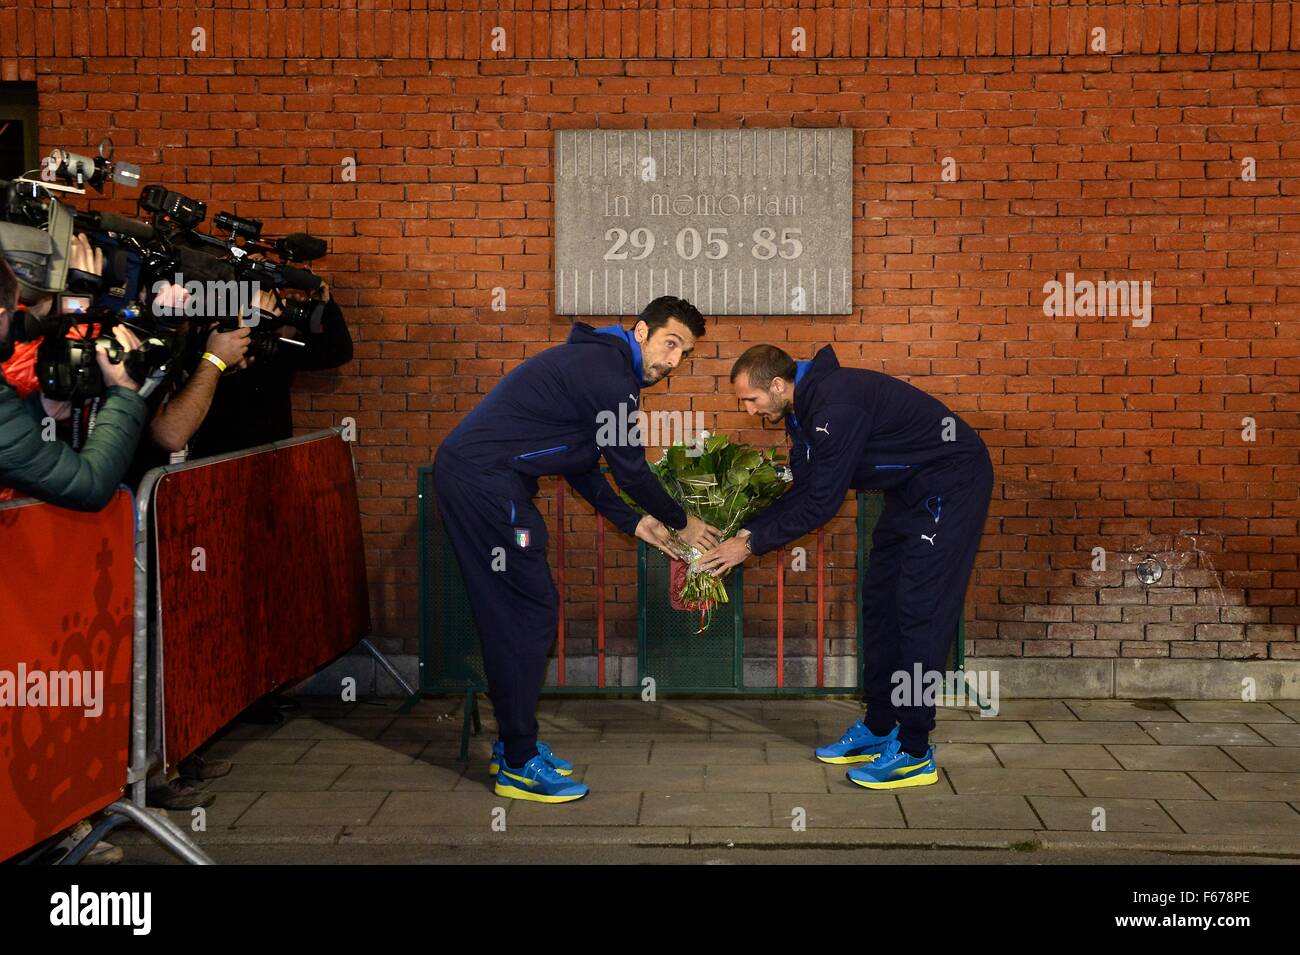 12.11.2015. King Baudouin Stadium (Formerly Heysel Stadium) Brussels, Belgium. The Juventus team visit the location where 39 fans from Liverpool and Juventus were killed during riots at the European cup final in May 1985 (30 years ago).  Gianluigi Buffon and Giorgio Chiellini lay a wreath Stock Photo